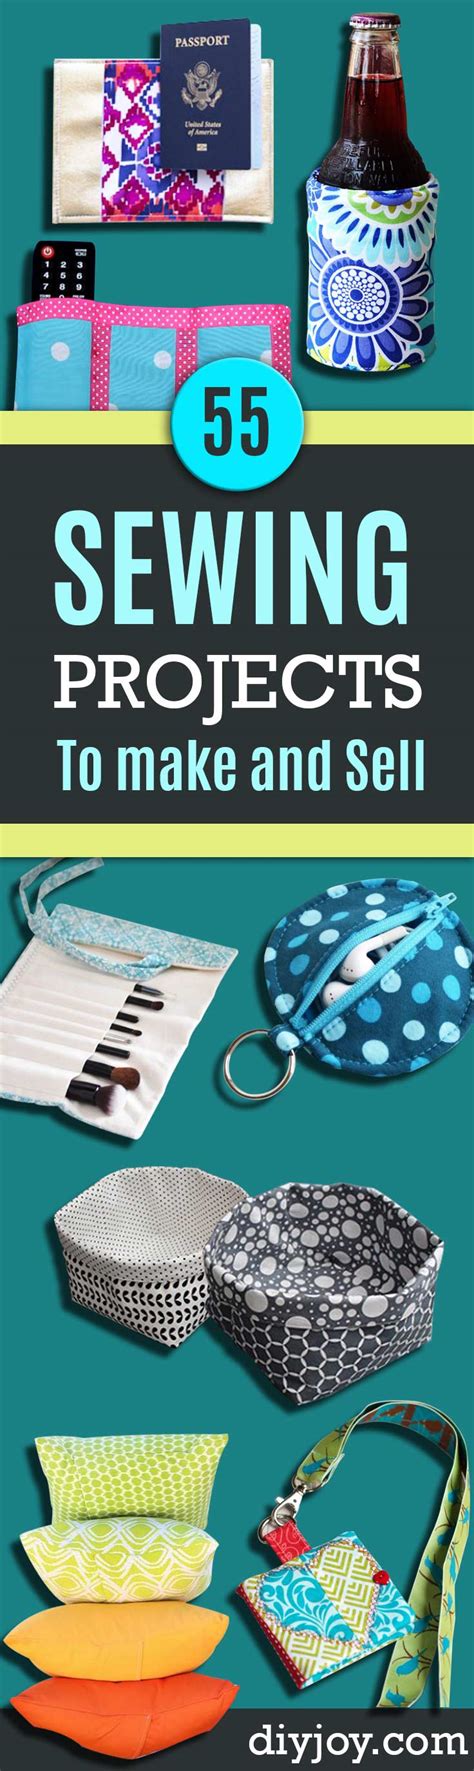 55 Sewing Projects To Make And Sell